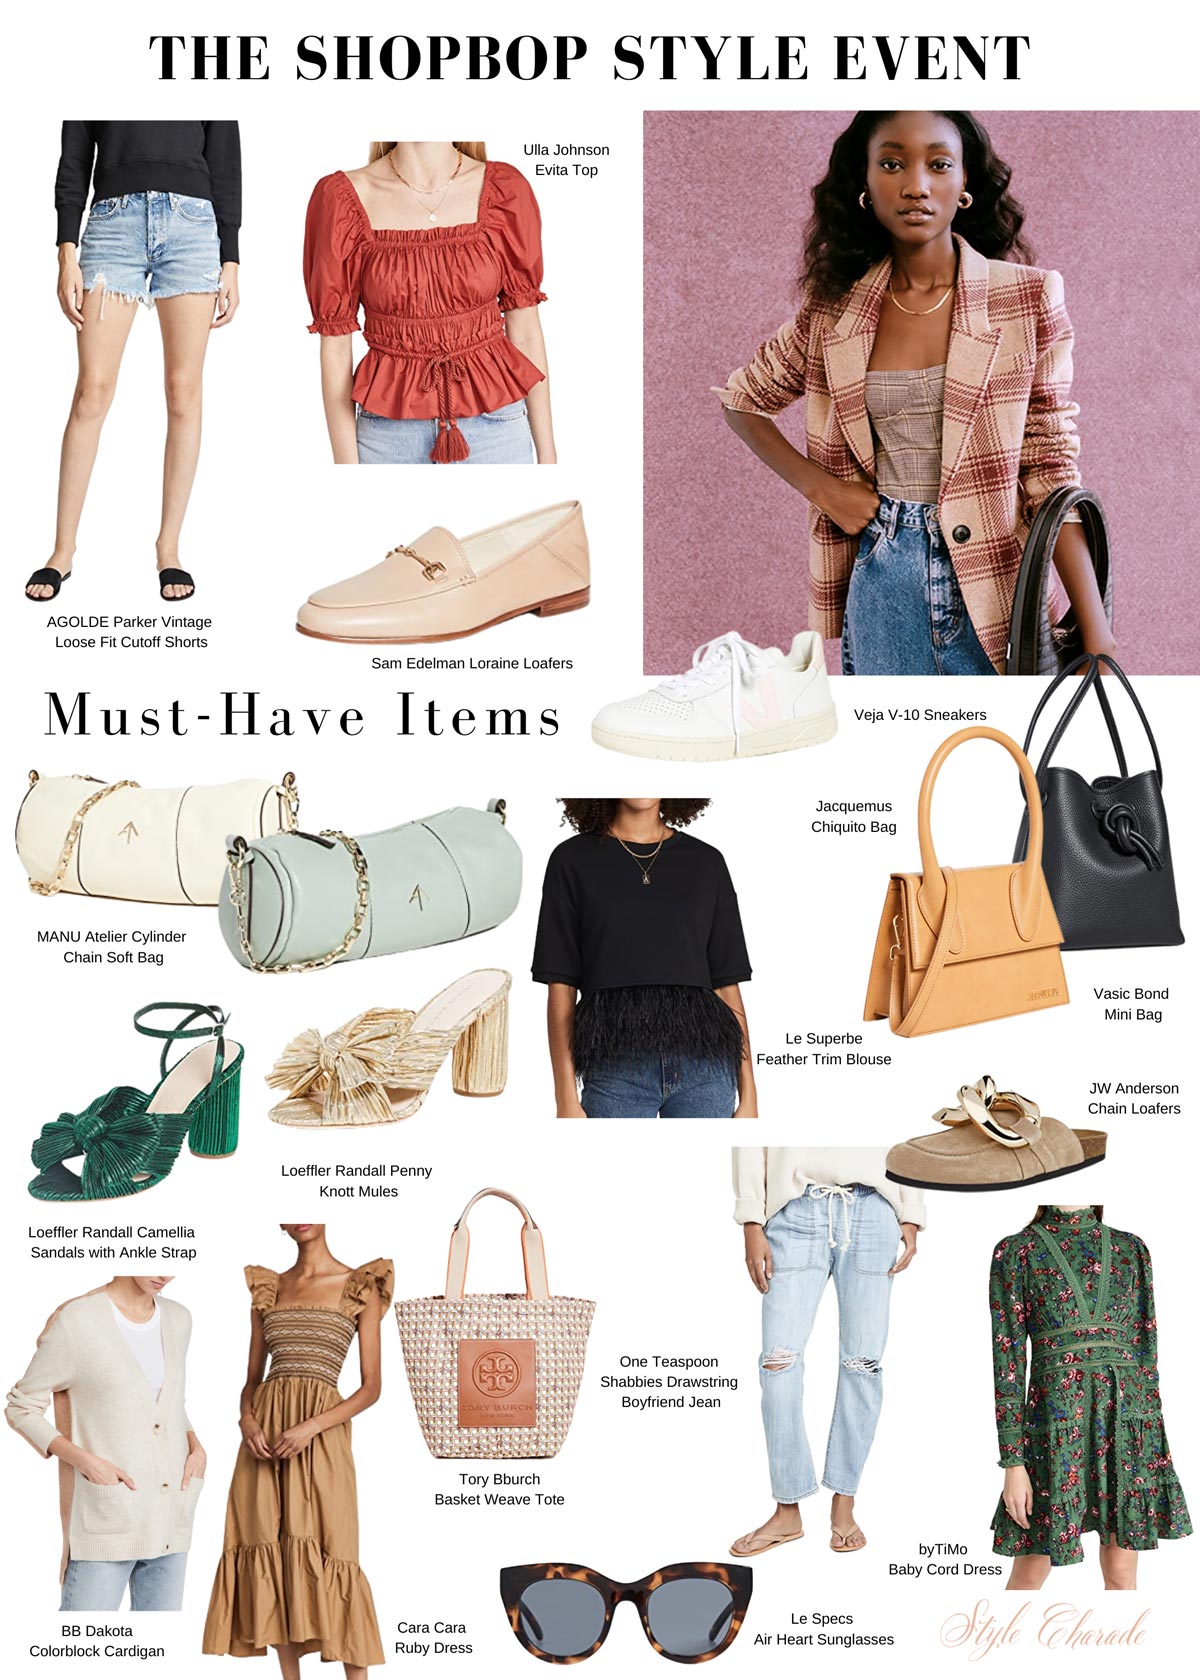 Shopbop Sale | Buy More Save More | Fall Style Event